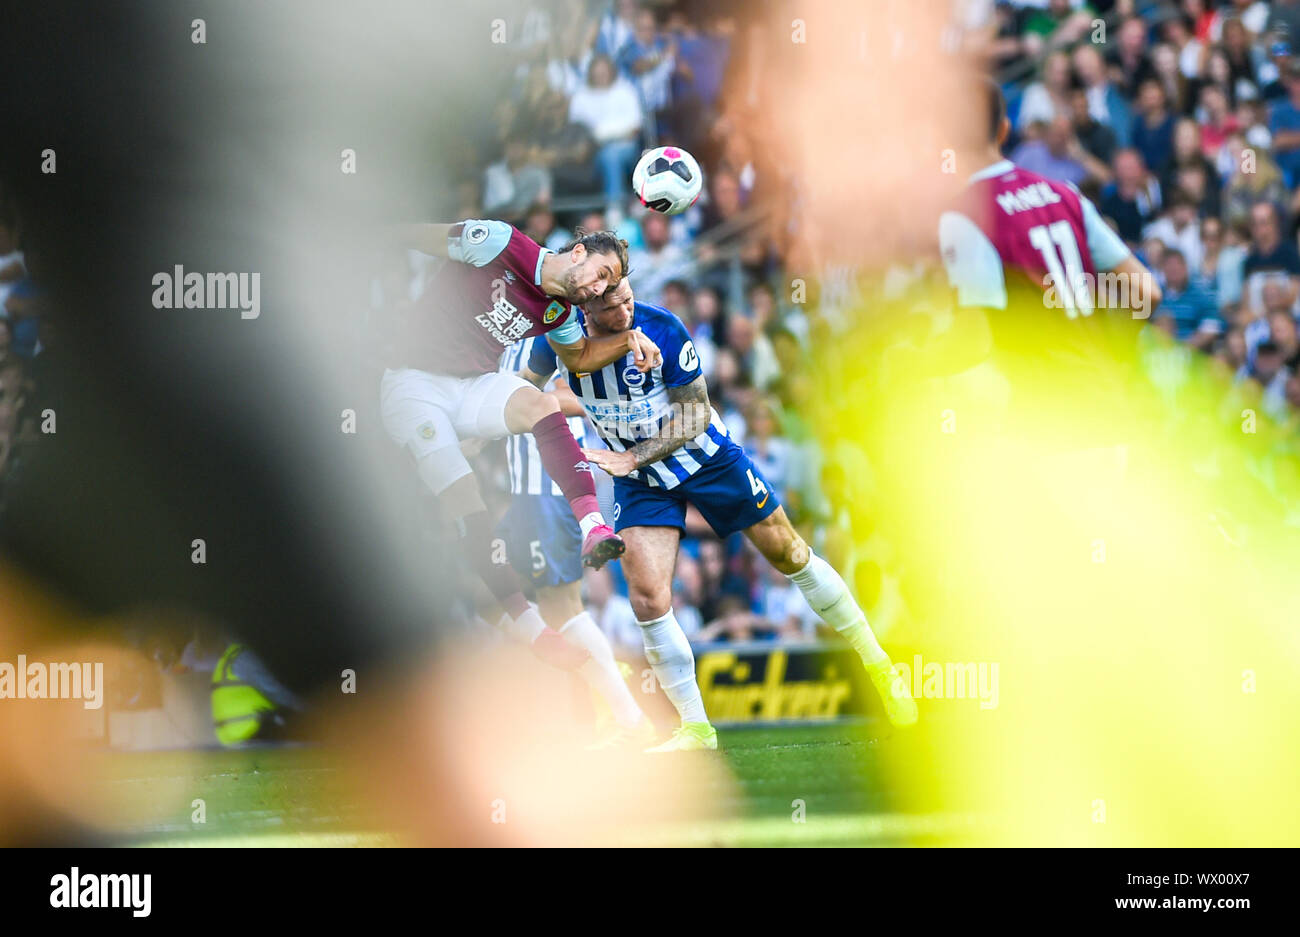 Jay Rodriguez of Burnley challenges Shane Duffy of Brighton as they are framed by the referee assistants flag during the Premier League match between Brighton and Hove Albion and Burnley at the American Express Community Stadium , Brighton , 14 September 2019 - Editorial use only. No merchandising. For Football images FA and Premier League restrictions apply inc. no internet/mobile usage without FAPL license - for details contact Football Dataco Stock Photo